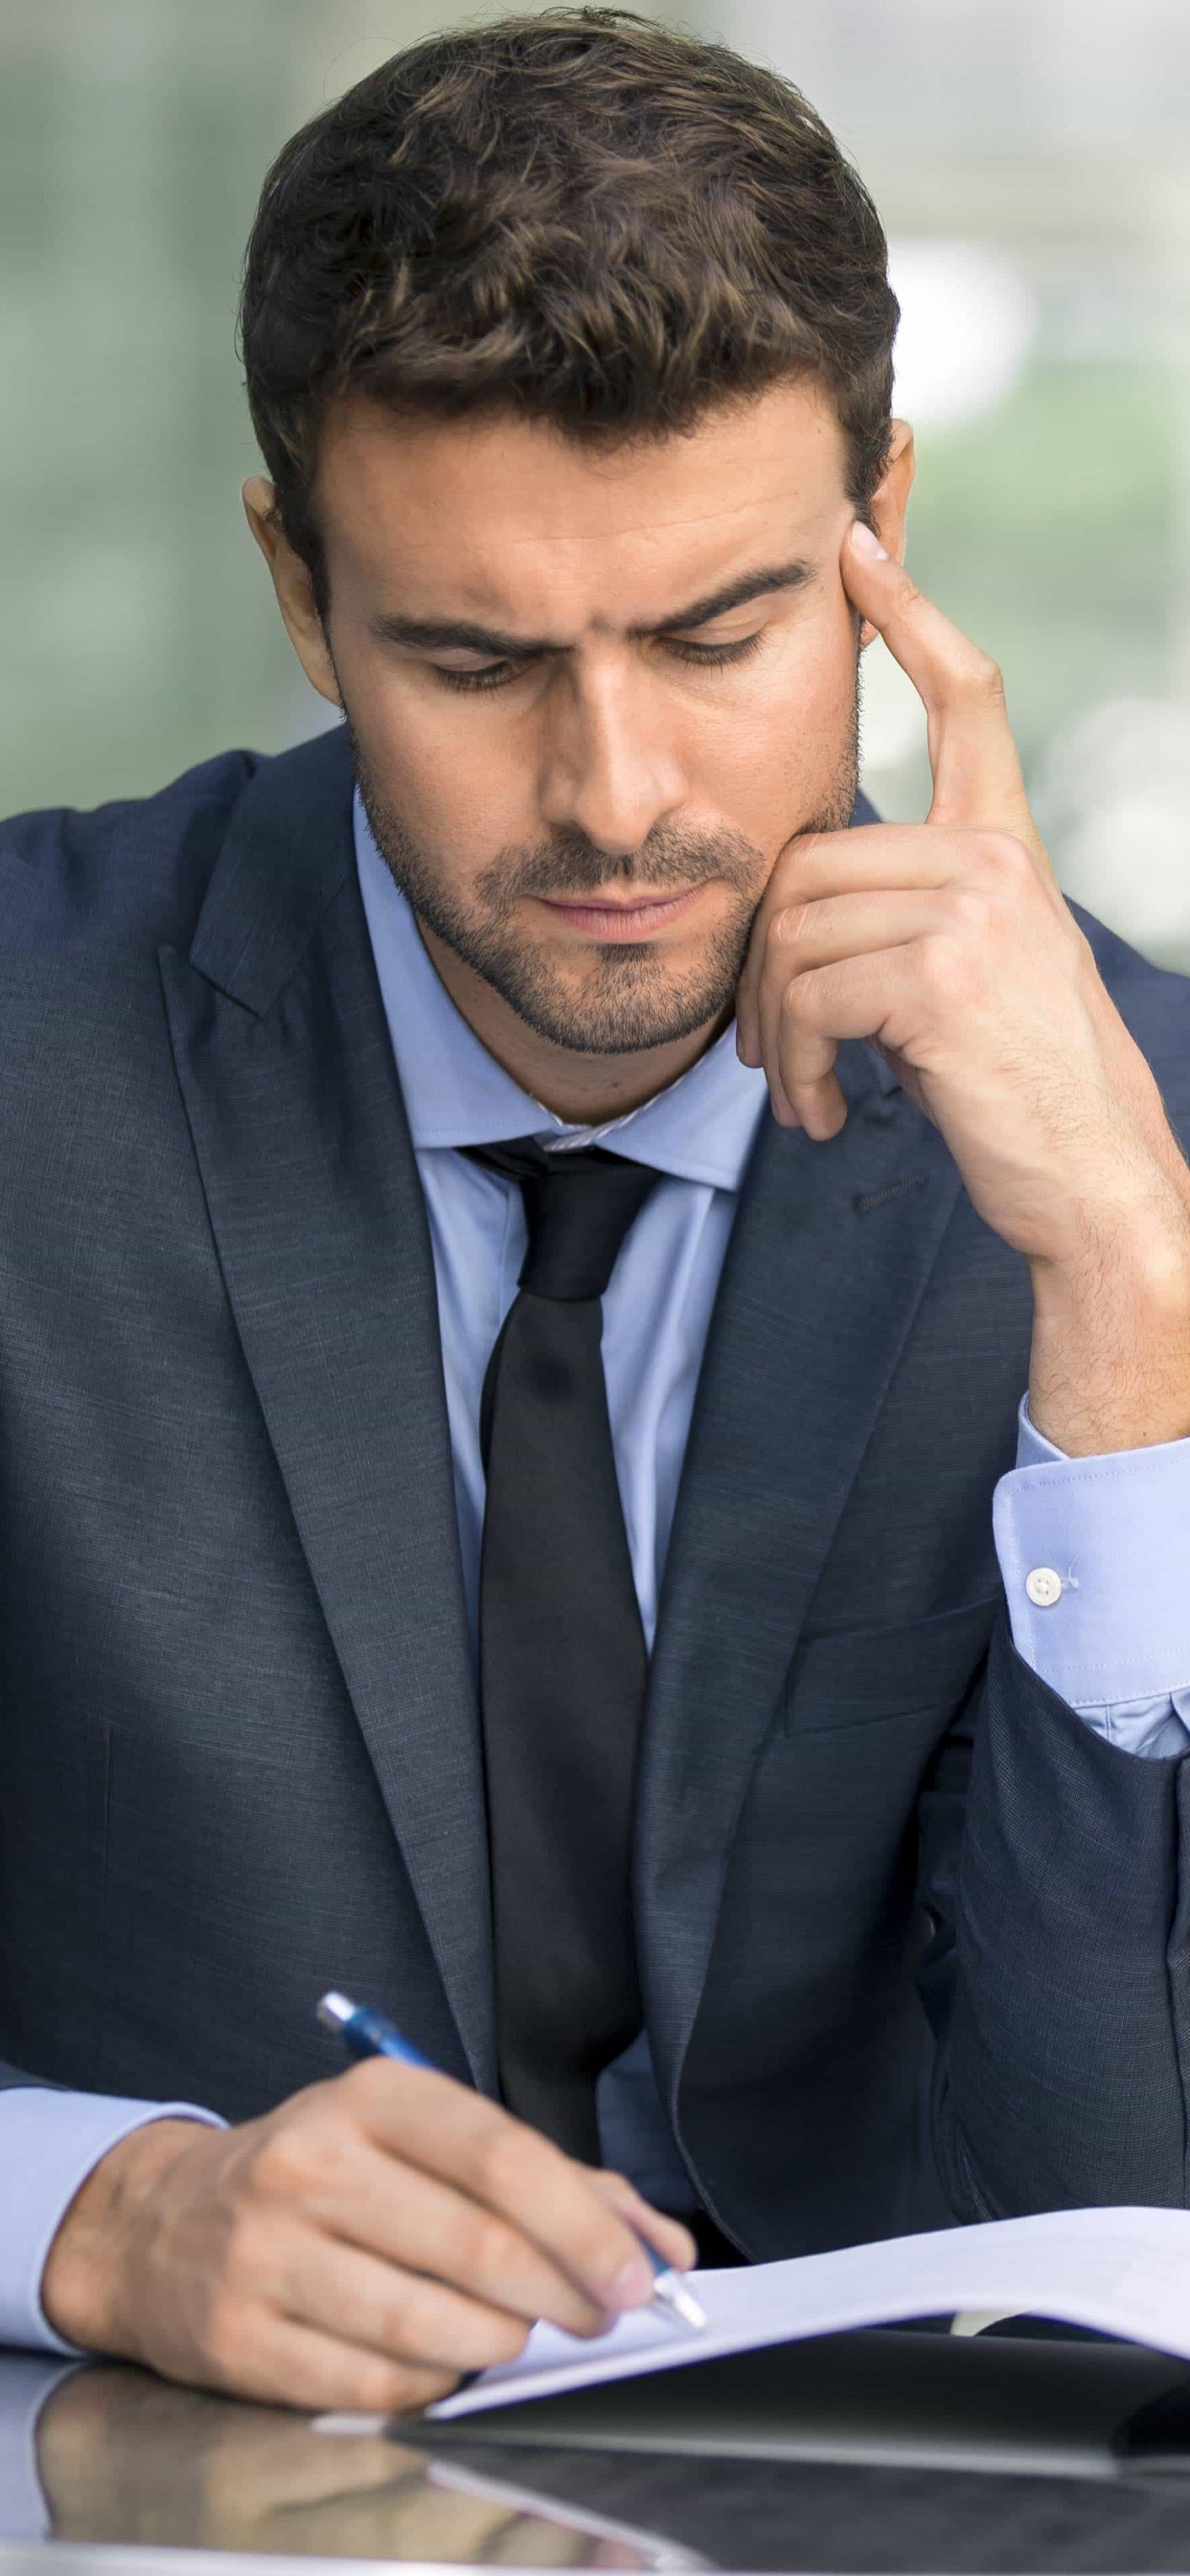 Businessman Thinking, Businessperson, Thought, Job, Business. Wallpaper in 1242x2688 Resolution